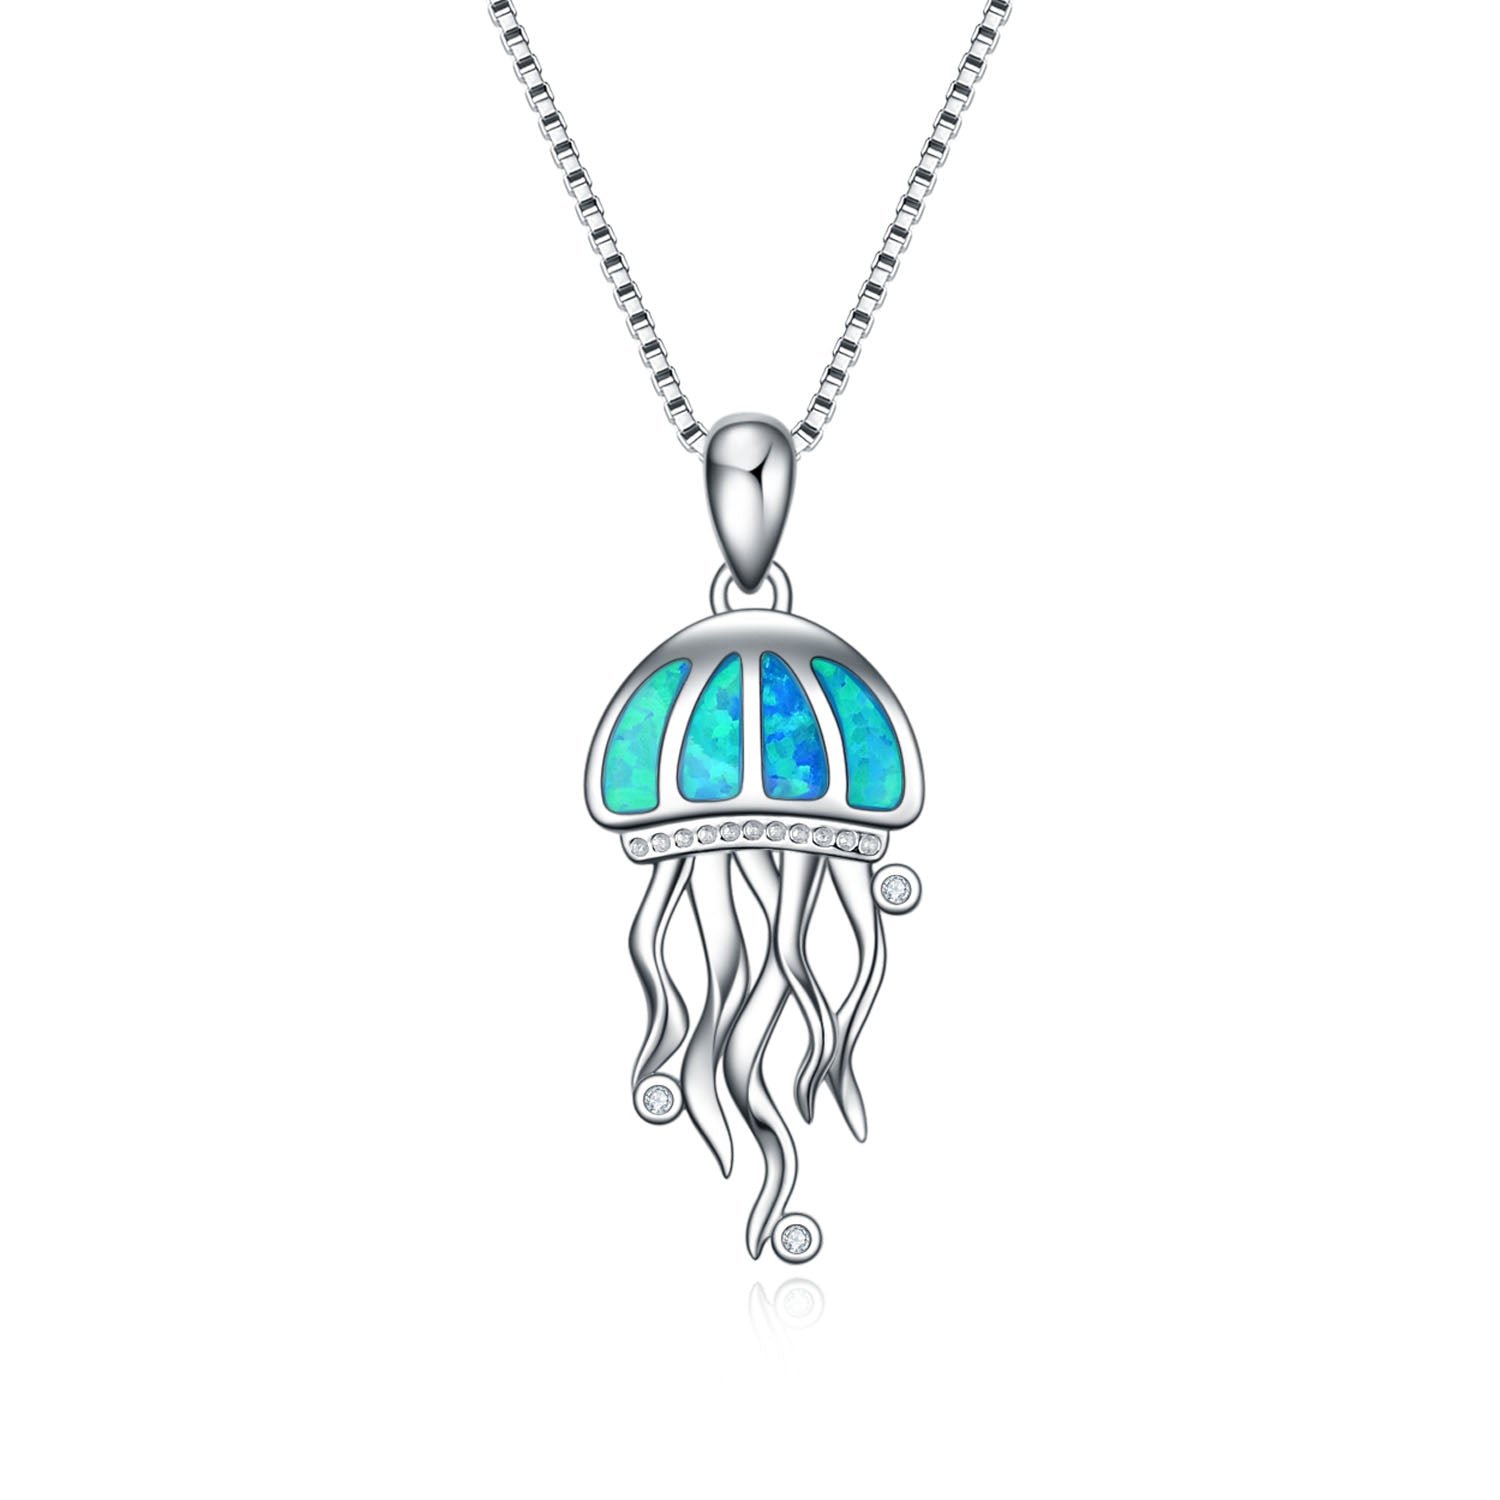 Moonstone Crystal Necklace 925 Sterling Silver Jellyfish Style